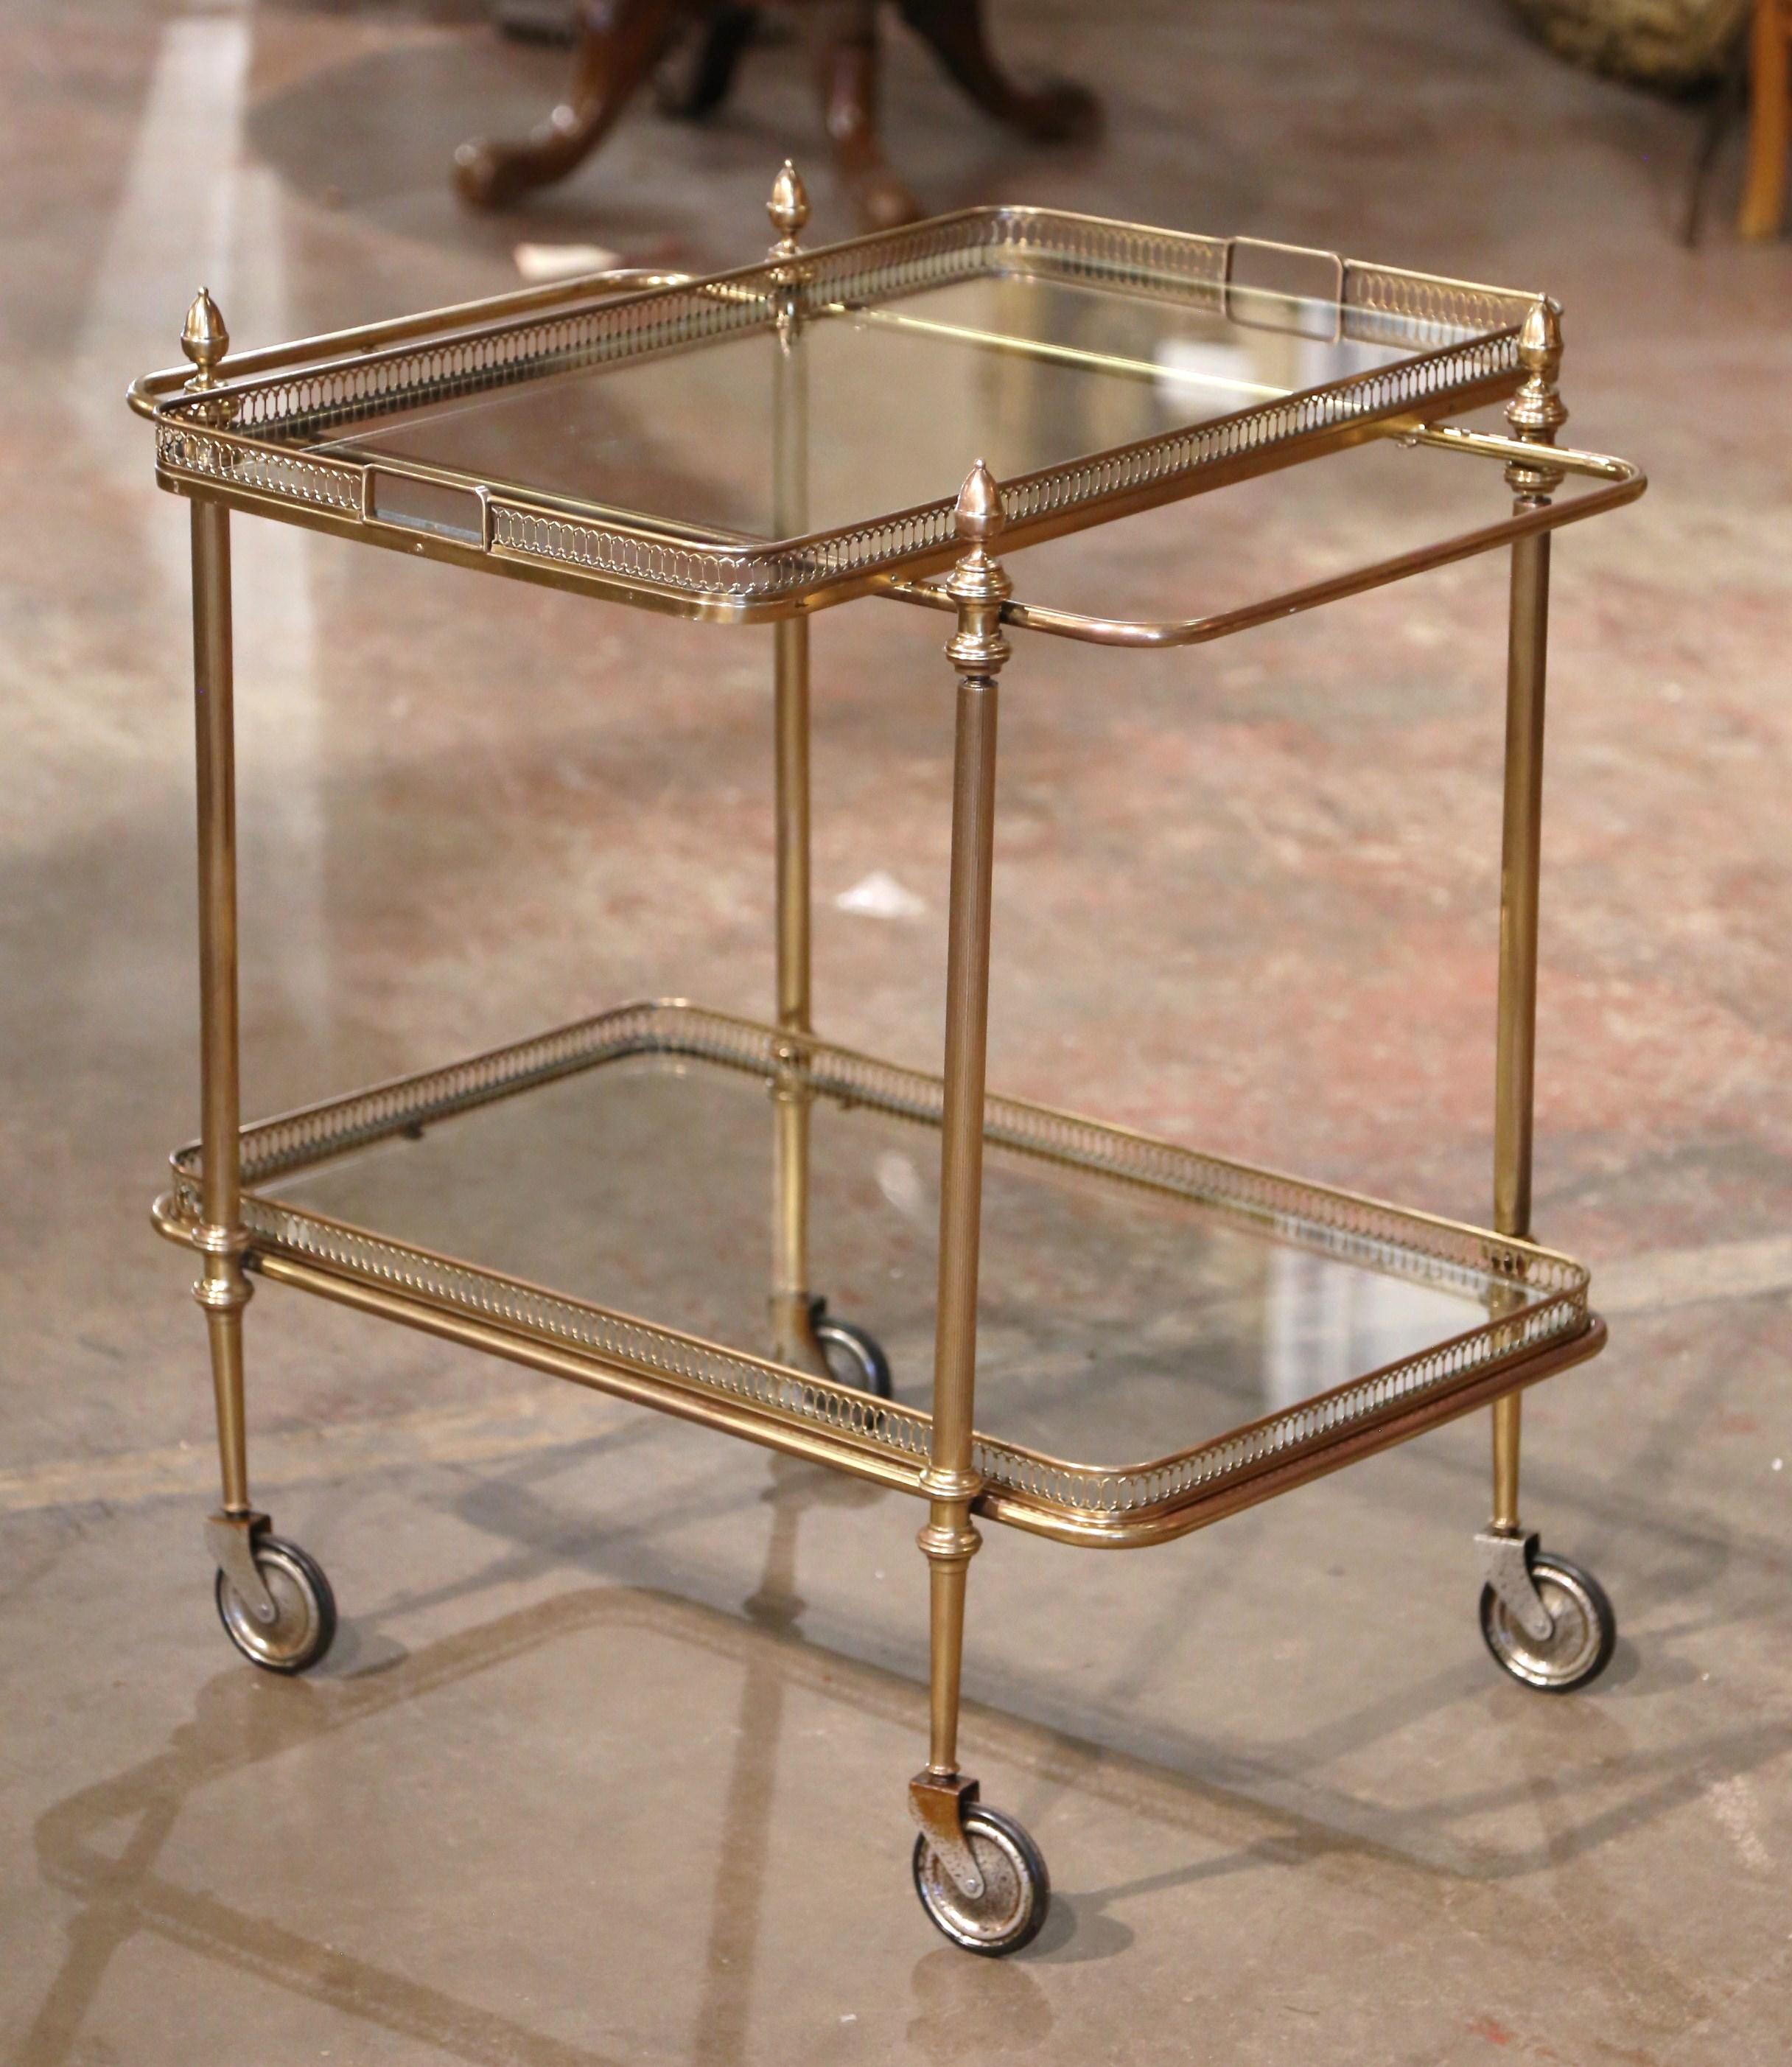 Art Deco Early 20th Century French Gilt Brass Two-Tier Service Trolley Bar Cart on Wheels